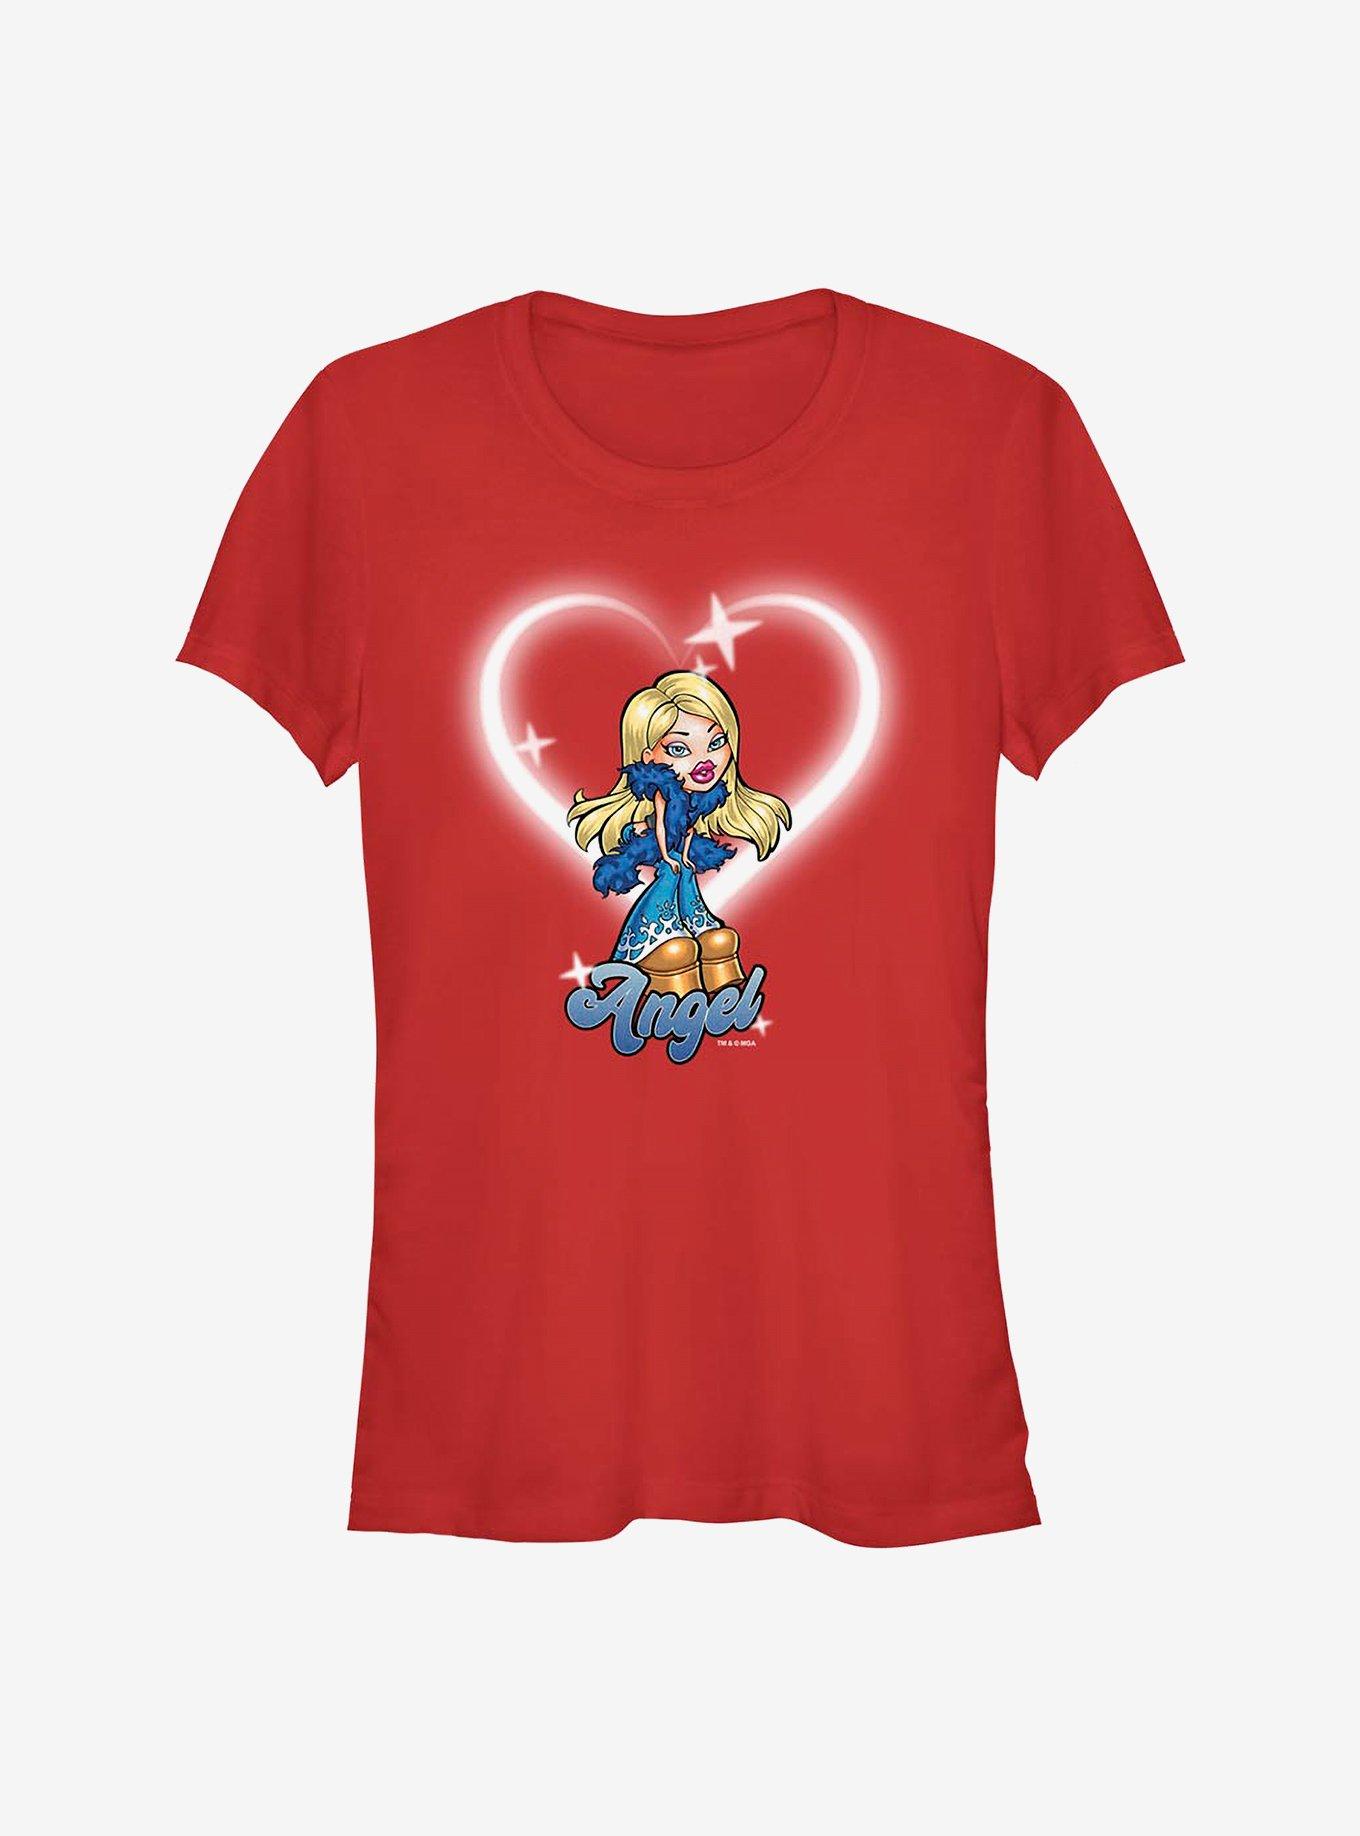 Bratz Angel Outfit Of The Day Girls T-Shirt